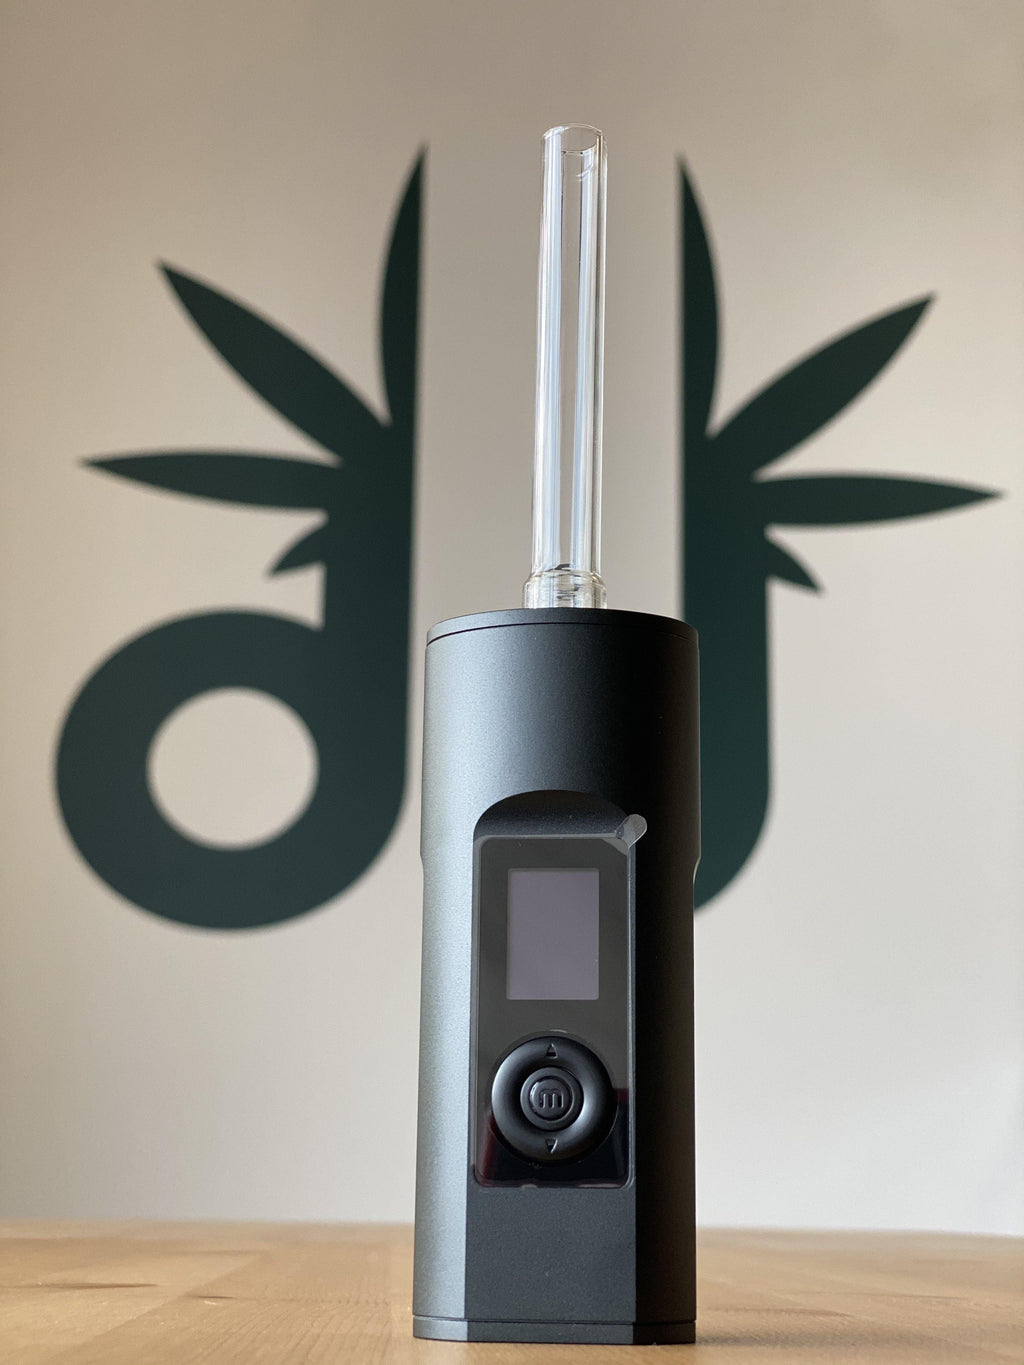 Arizer Solo 2 for sale in Canada - Budders Cannabis